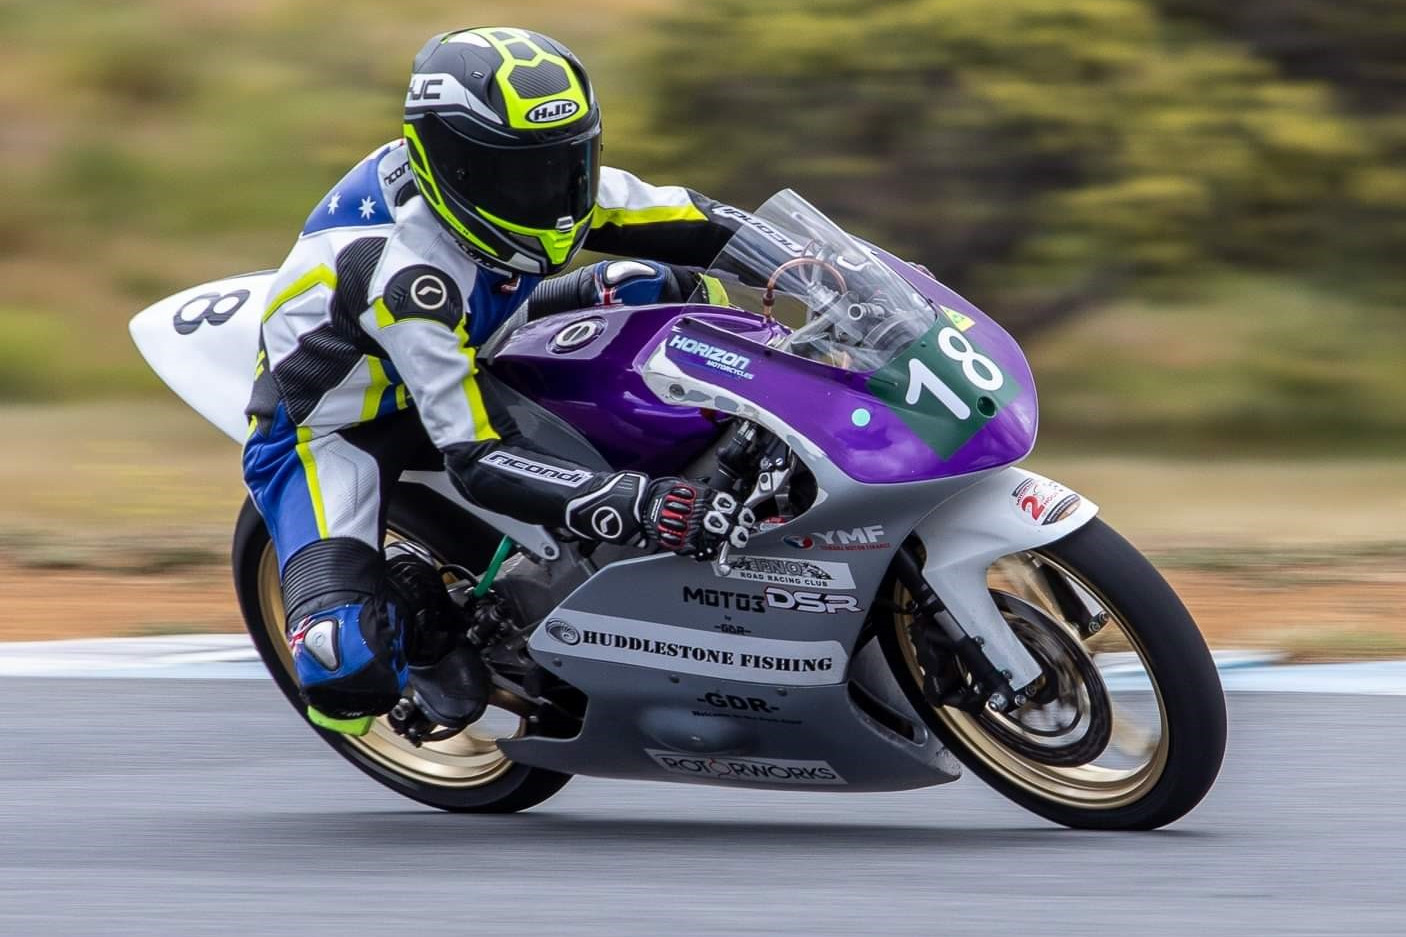 Mareeba-based motorbike racer Liam Waters will be the only Far North Queensland rider in the upcoming Australian Superbike Series held in February.